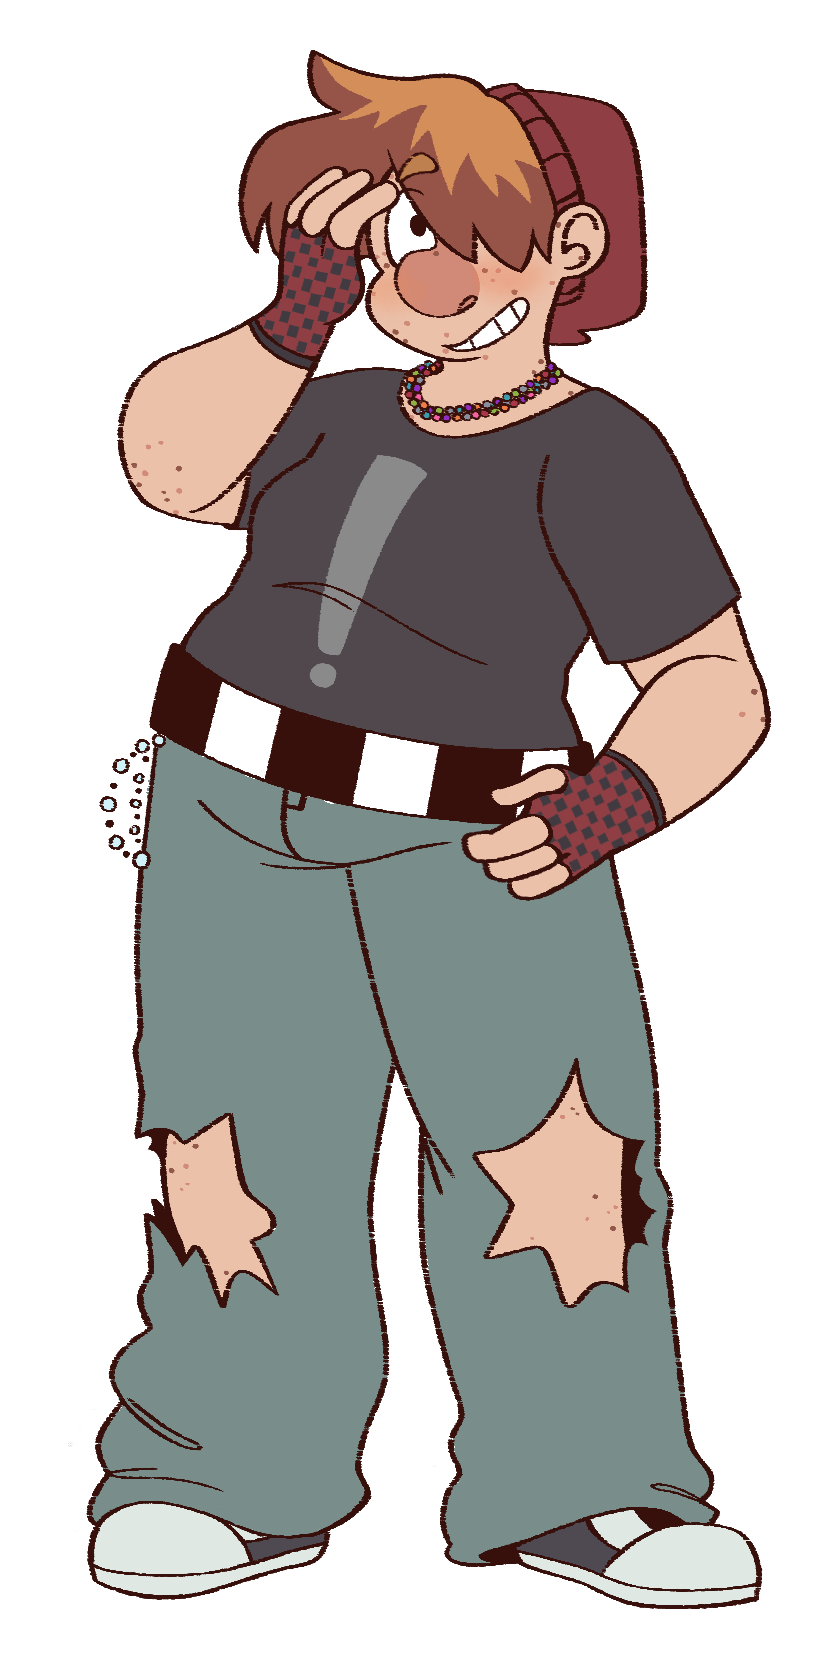 A fullbody drawing of Jess; they have ginger hair and wear a red beanie. They wear a grey t-shirt with an exclamation point logo, ripped blue jeans, black and red checkered gloves, and sneakers. They have a smile and lots of freckles on their face.